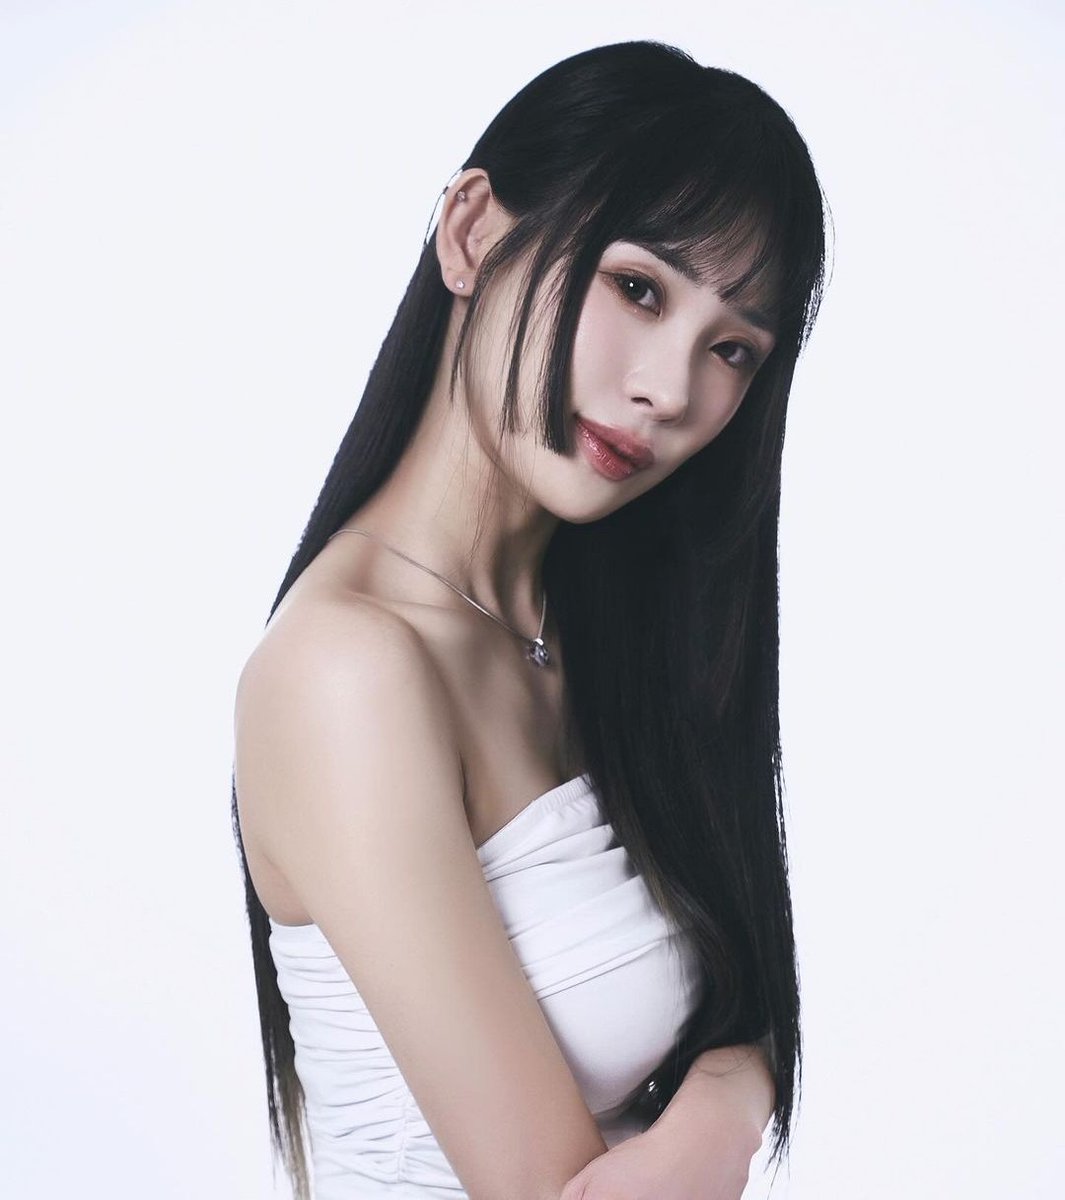 Jsun is now DJ. She also made her solo debut with 'Belongs to You' in 2021. Ellia has released 'Weekend' in 2021 and 'Remember' in 2023